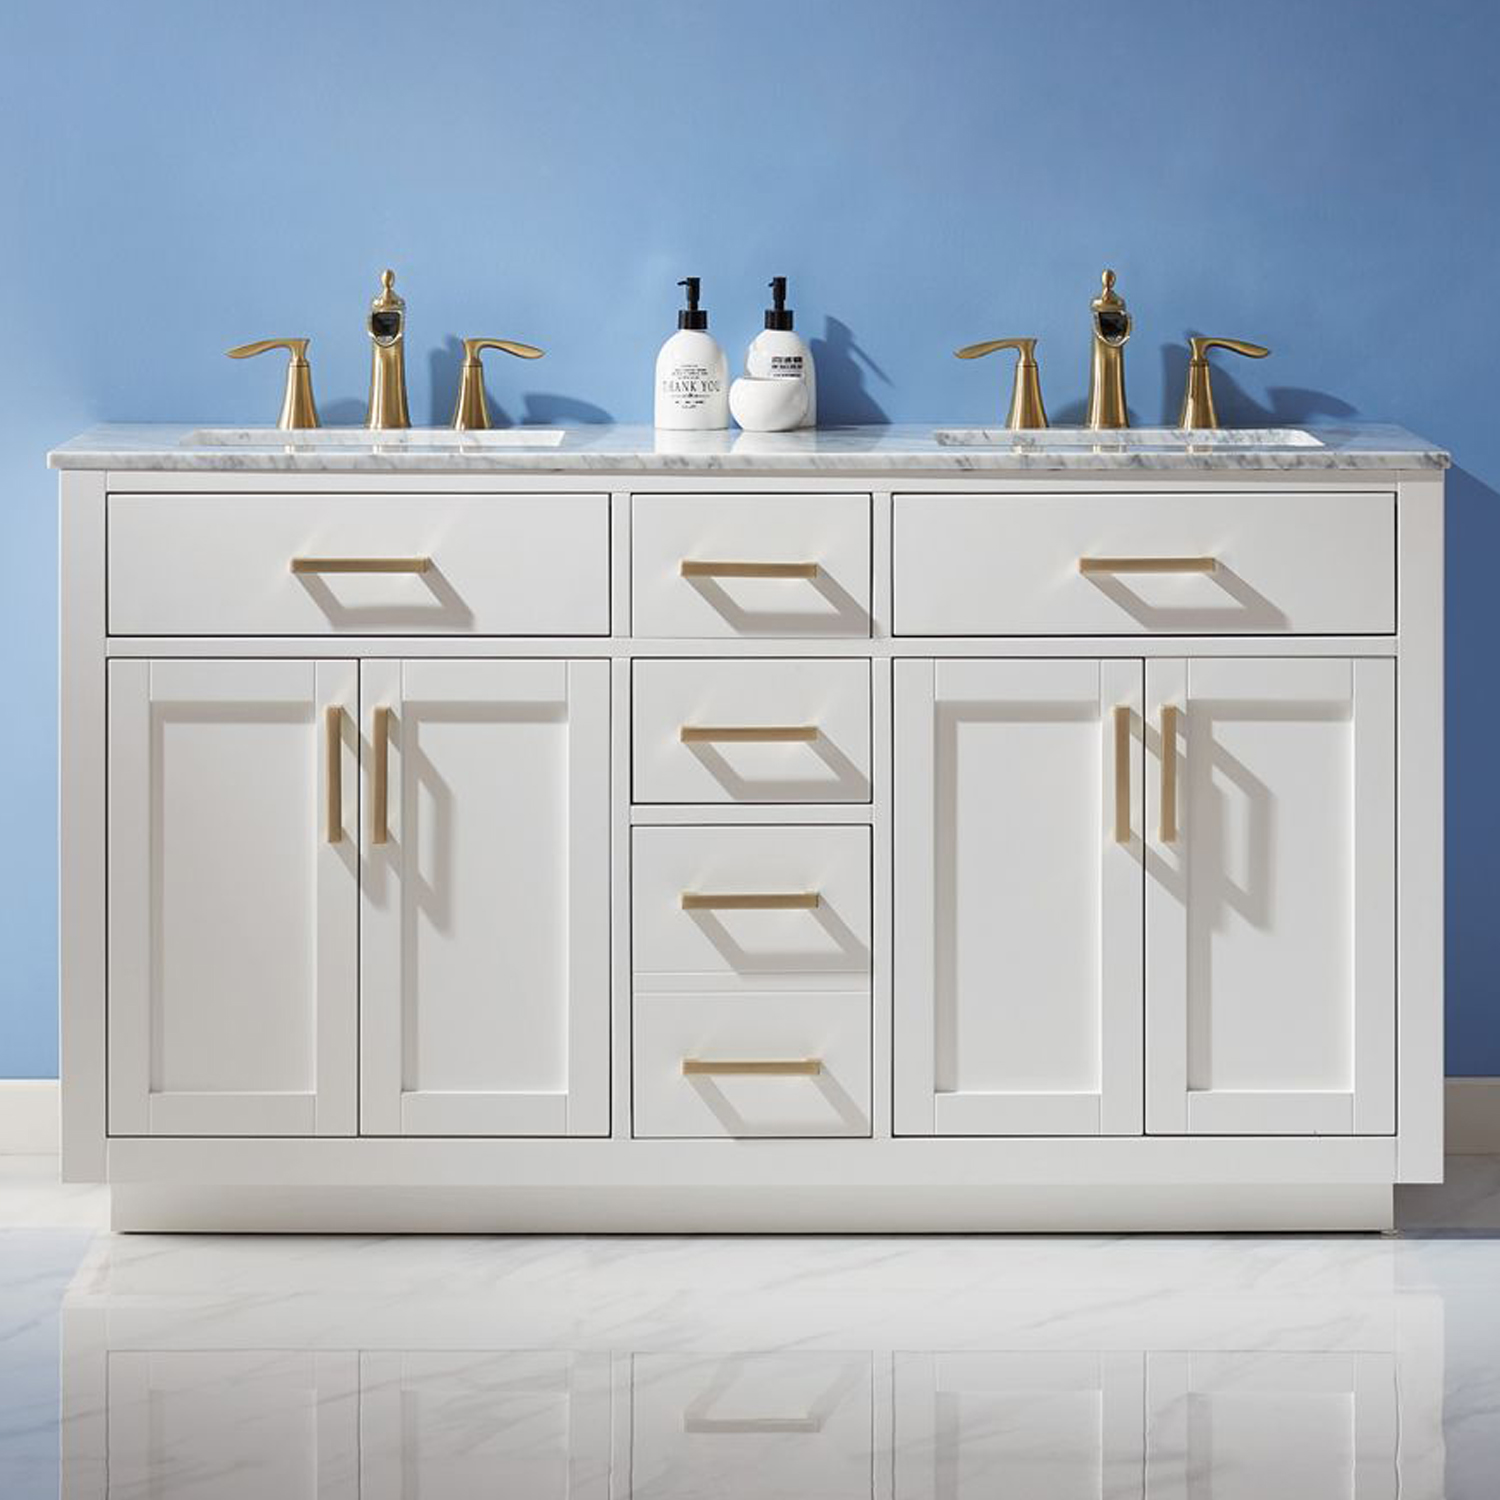 Issac Edwards Collection 60" Double Bathroom Vanity Set in White and Carrara White Marble Countertop without Mirror